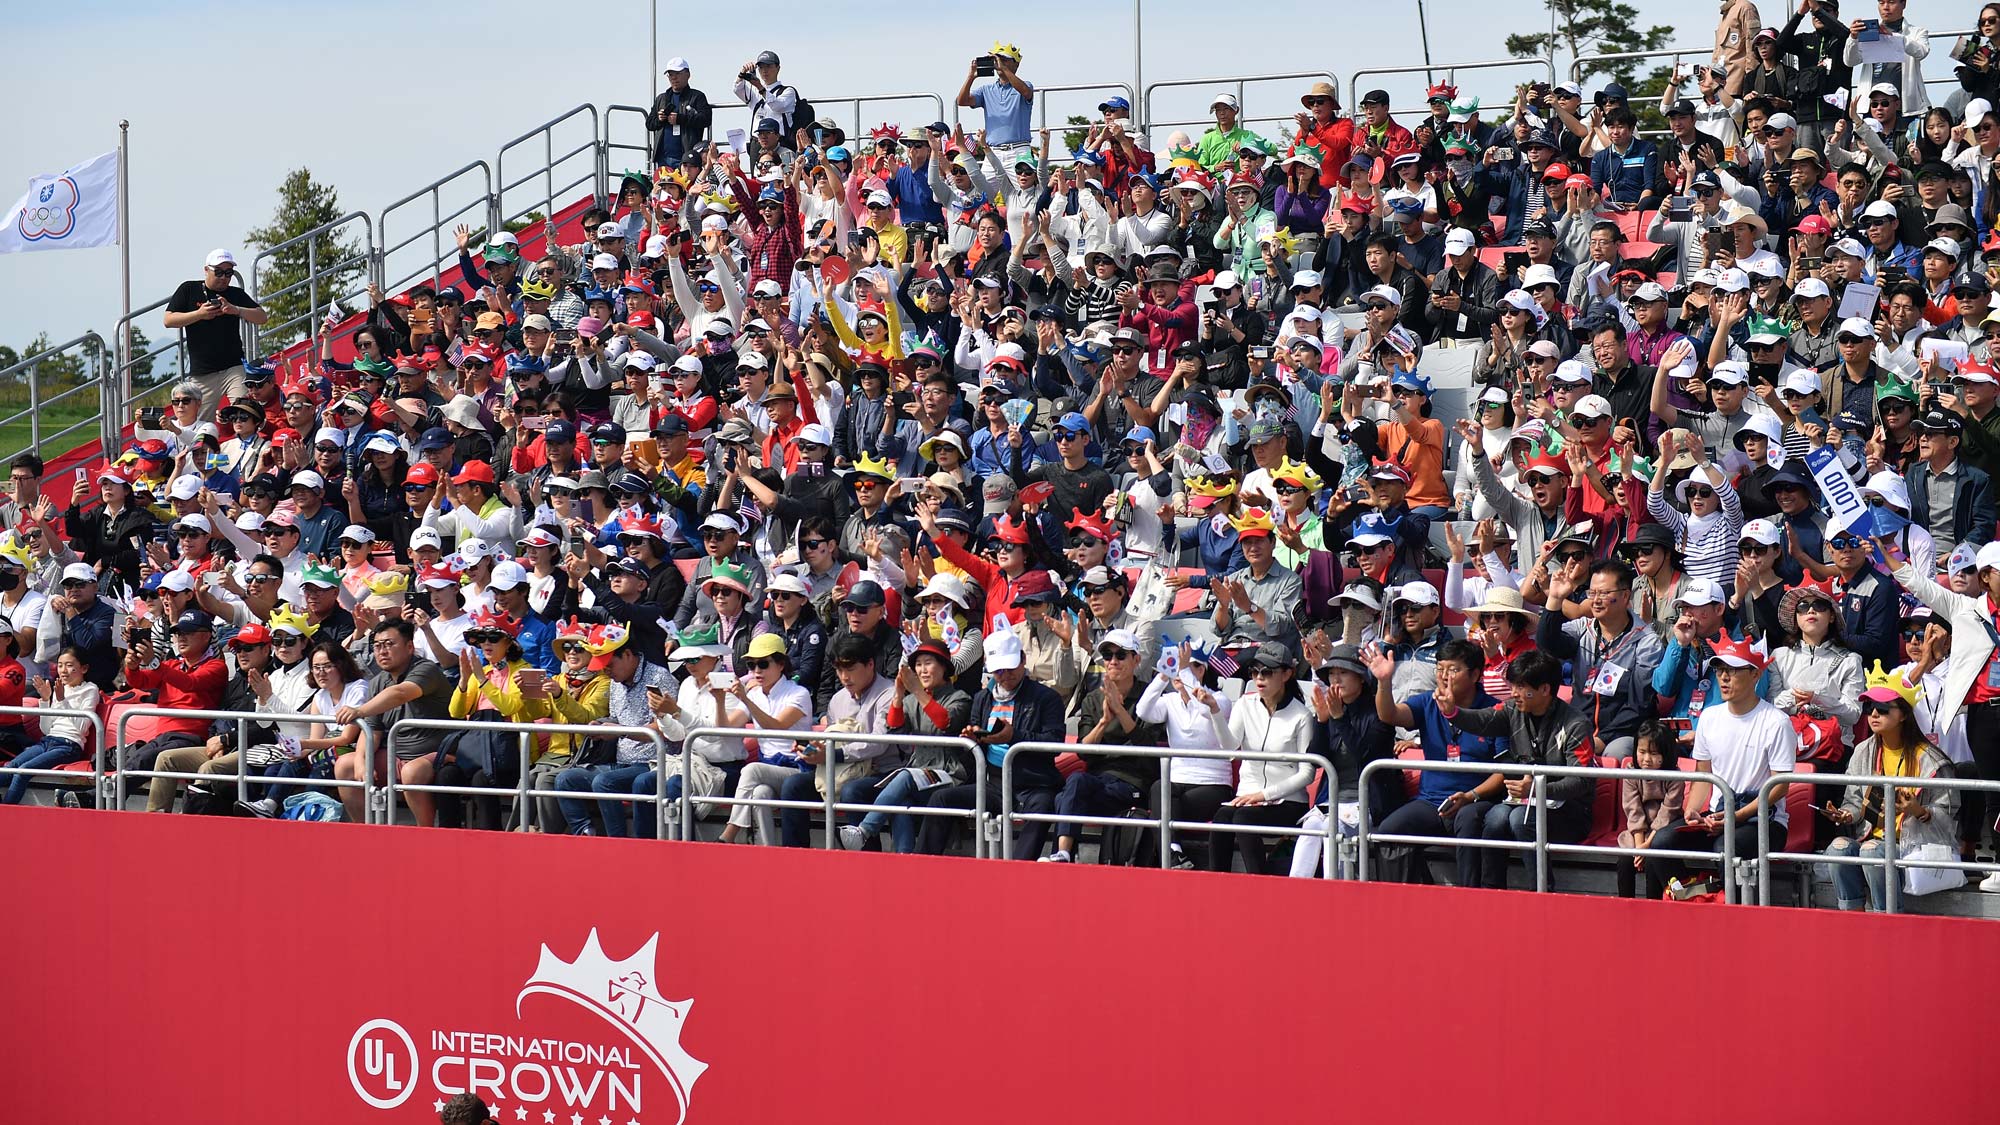 Fans watch on the stand on day four of the UL International Crown